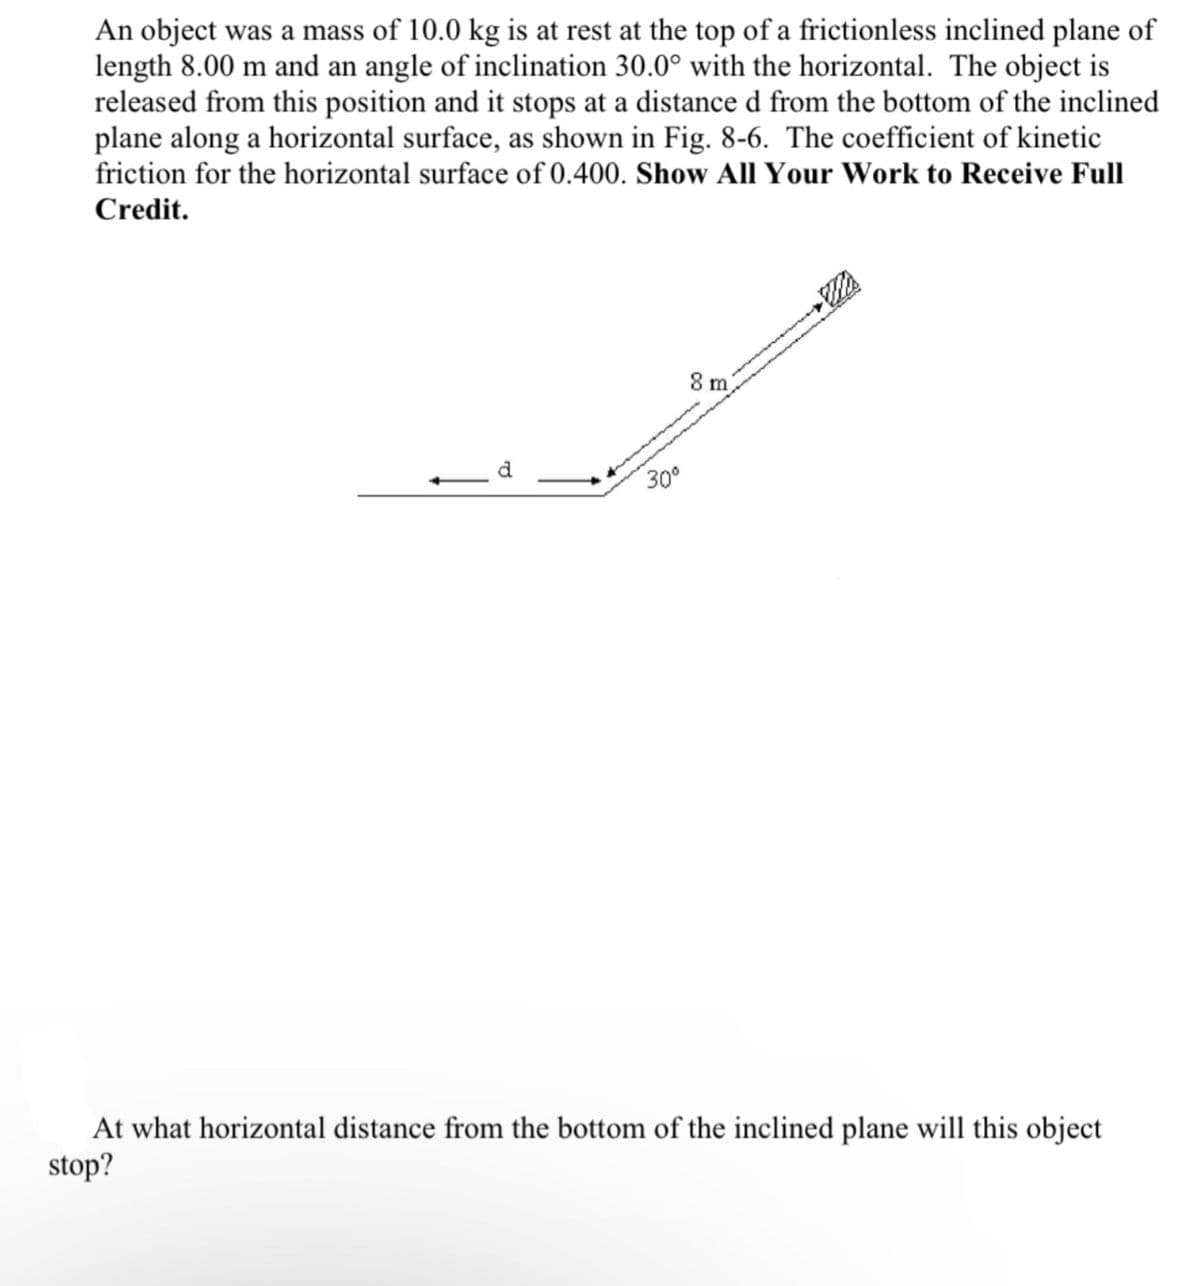 An object was a mass of 10.0 kg is at rest at the top of a frictionless inclined plane of
length 8.00 m and an angle of inclination 30.0° with the horizontal. The object is
released from this position and it stops at a distance d from the bottom of the inclined
plane along a horizontal surface, as shown in Fig. 8-6. The coefficient of kinetic
friction for the horizontal surface of 0.400. Show All Your Work to Receive Full
Credit.
d
30⁰
8 m
Wi
At what horizontal distance from the bottom of the inclined plane will this object
stop?